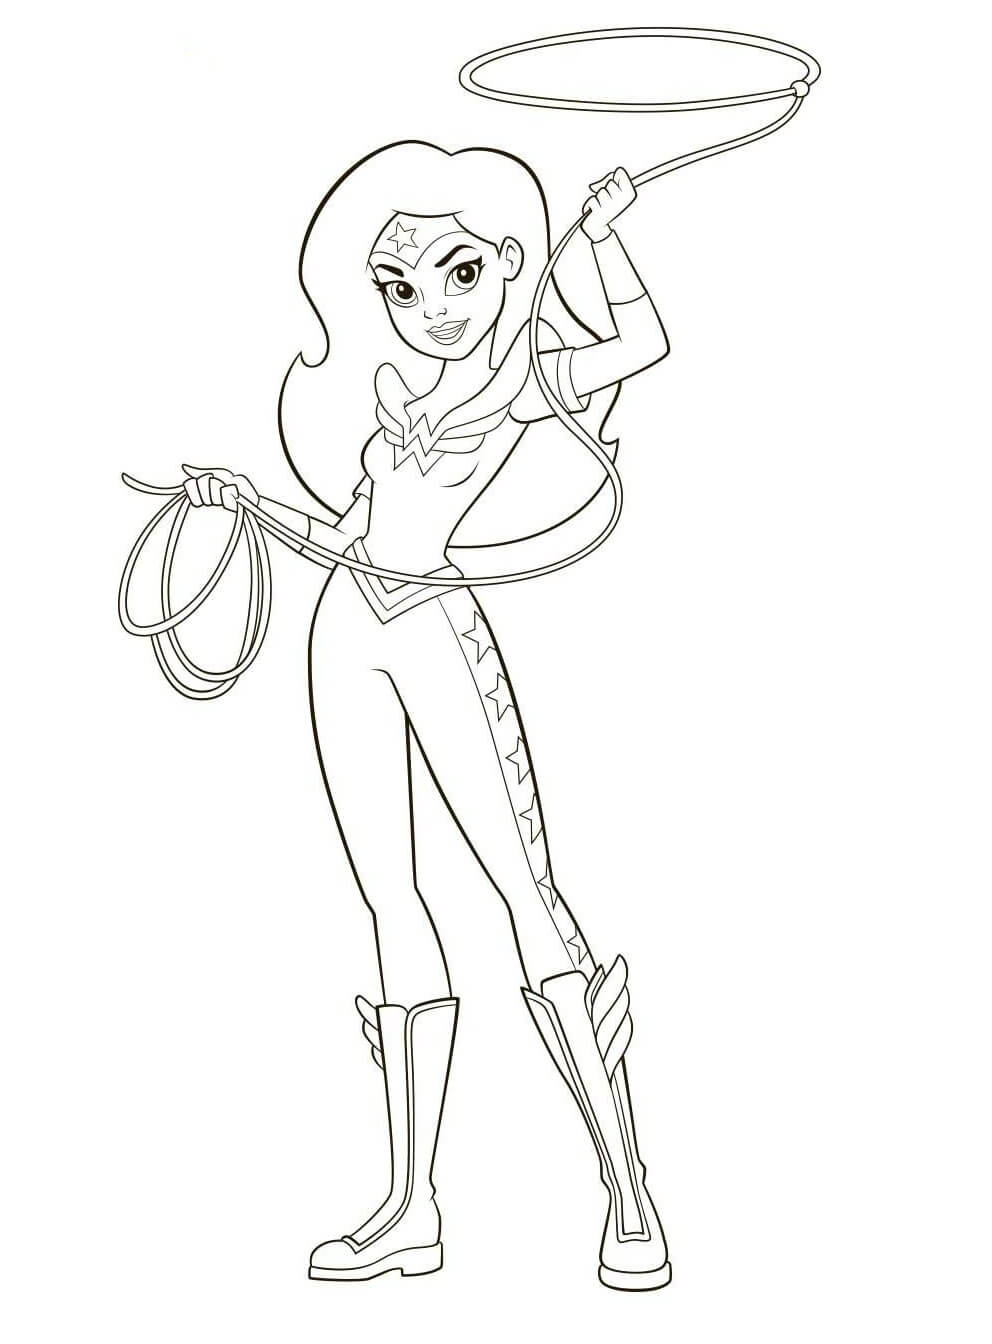 Wonder Woman from DC Super Hero Girls Coloring Page - Free Printable Coloring  Pages for Kids